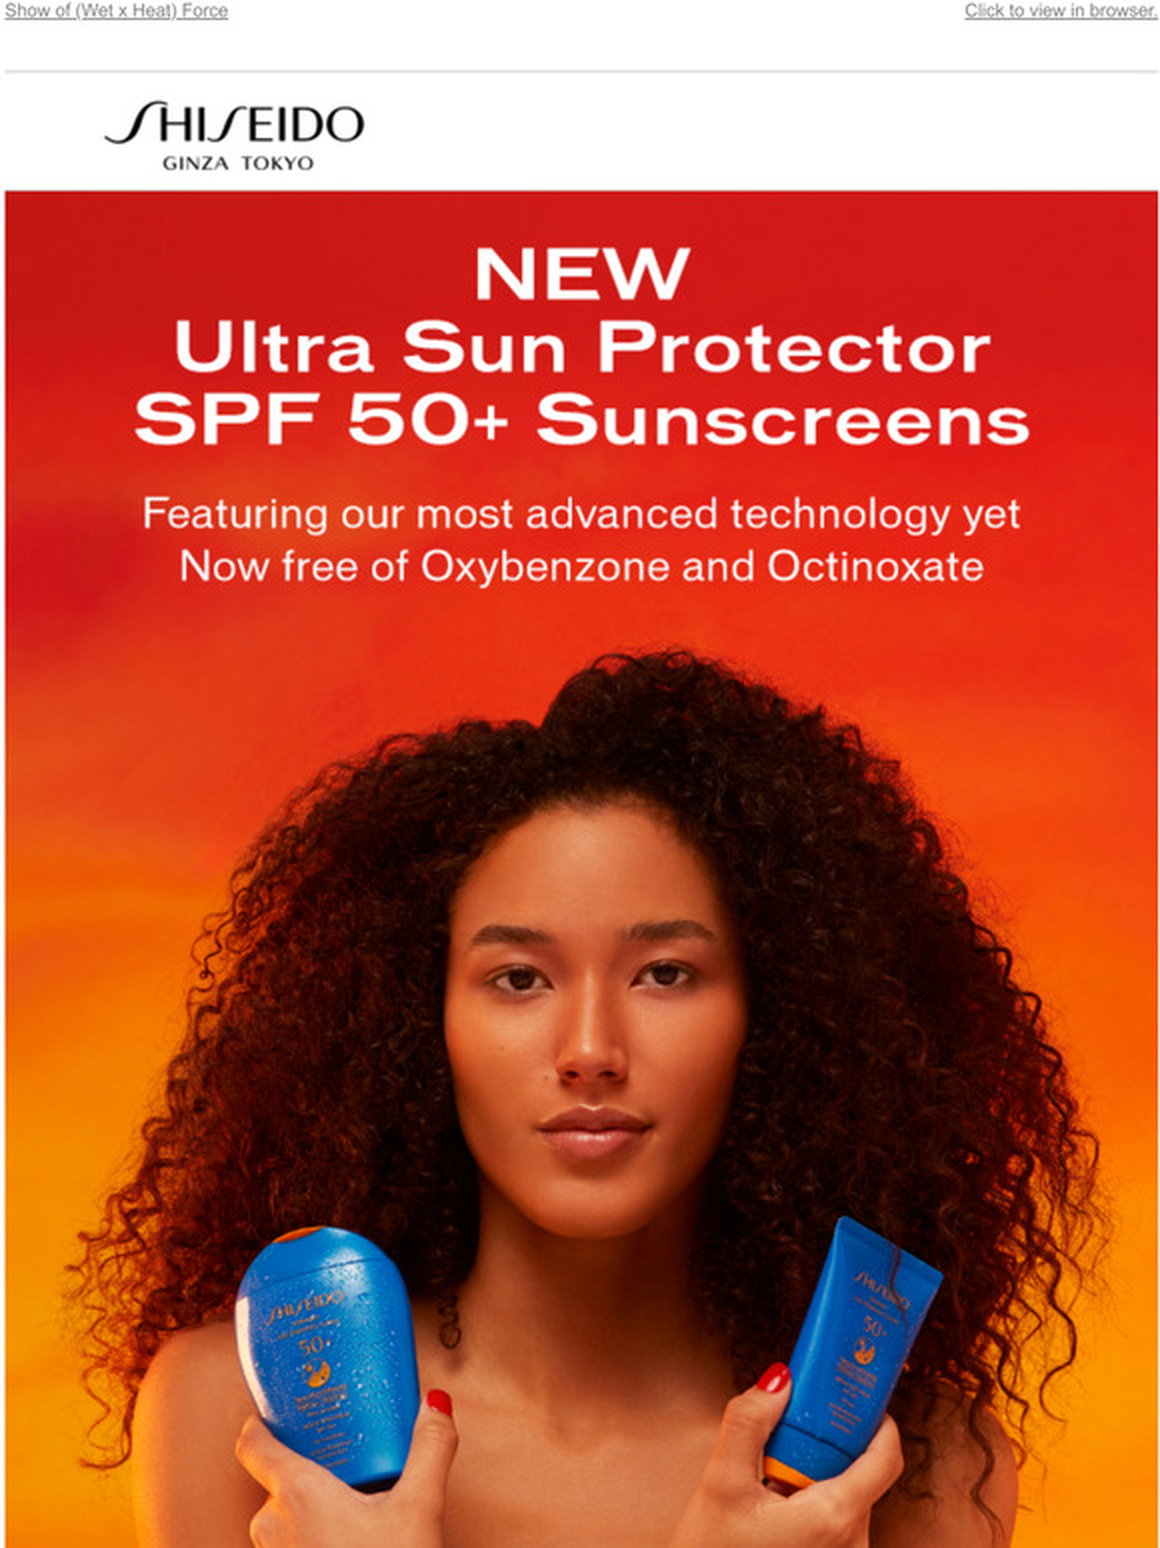 Shiseido Canada Our NEW groundbreaking sunscreen Milled